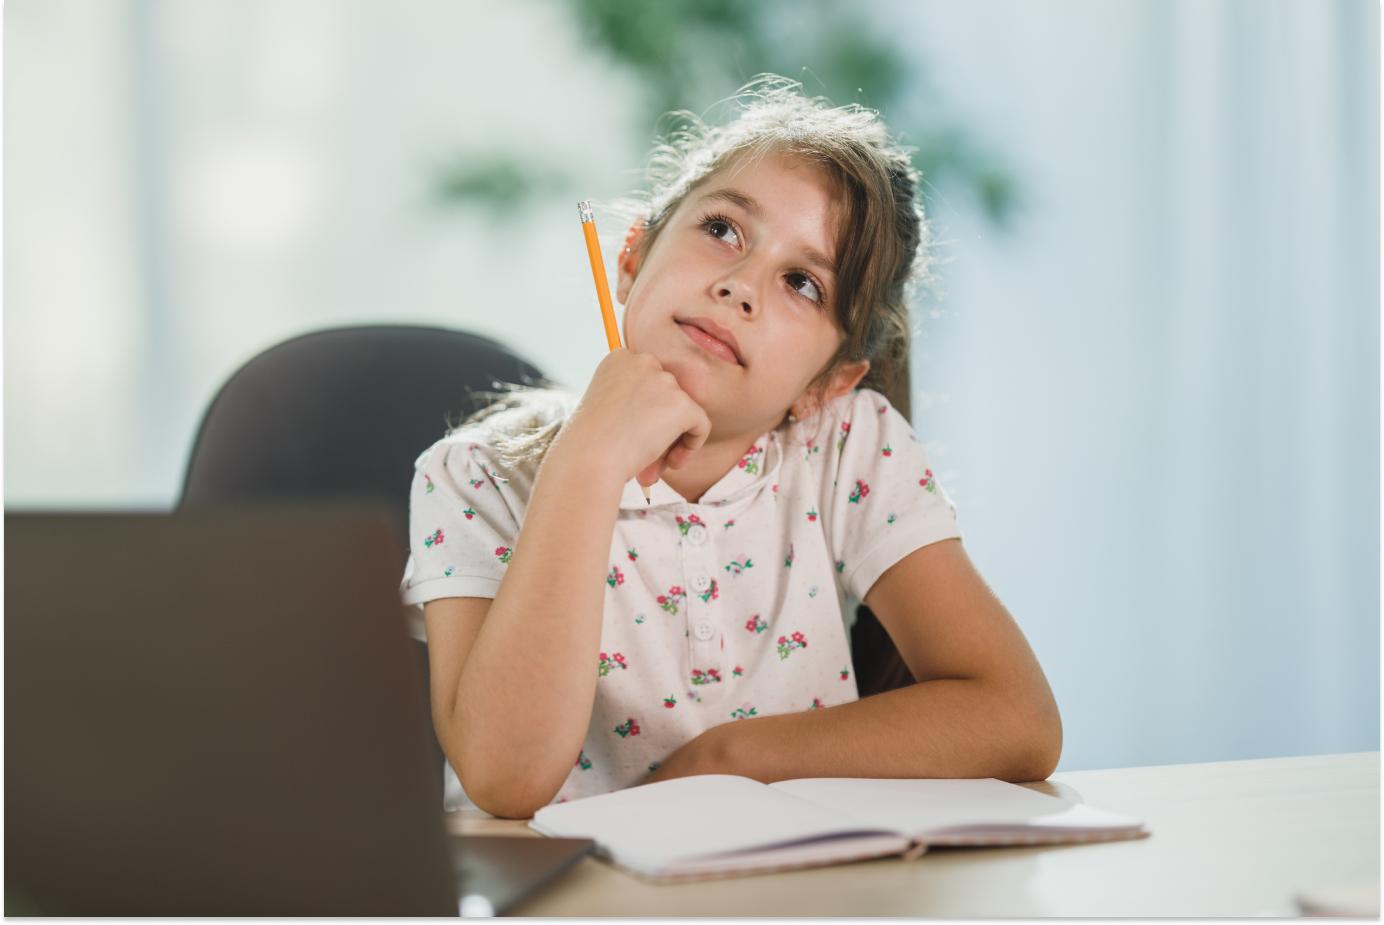 Girl sitting at a table in front of an open notebook. She's holding a pencil and has got her head in her hand, looking up and thinking.